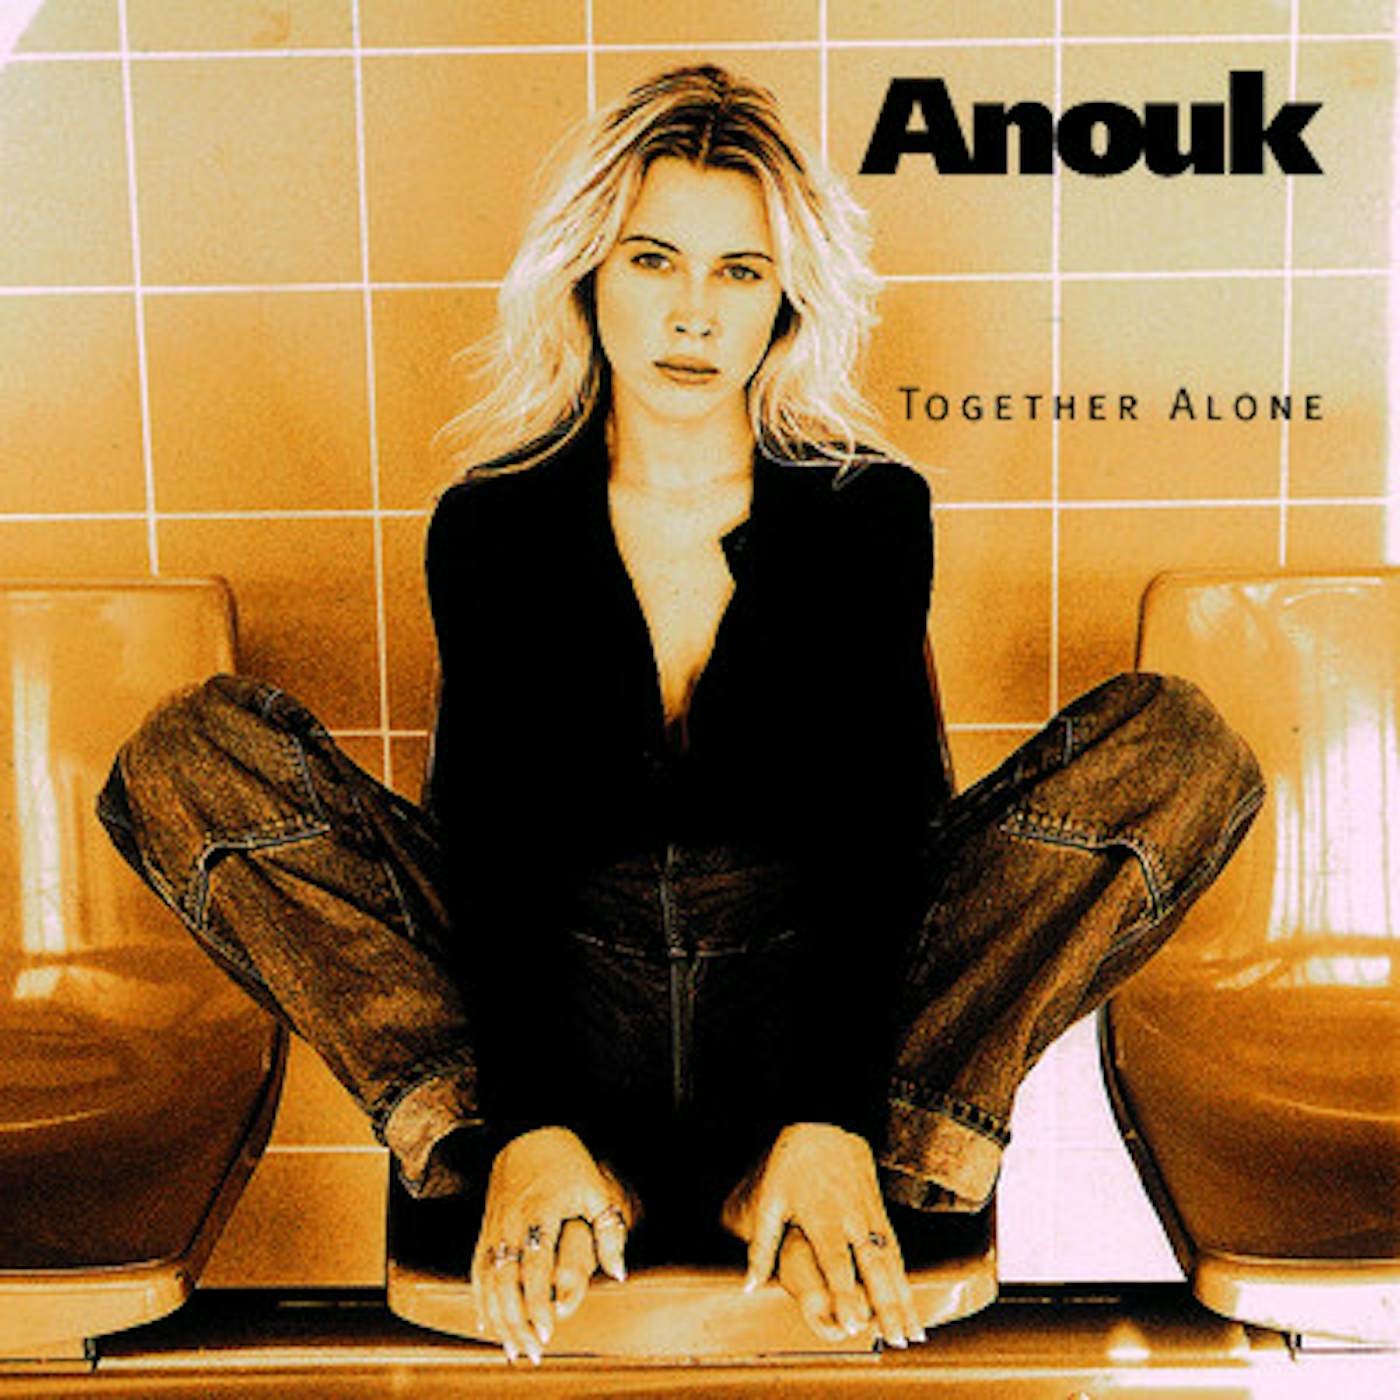 Anouk TOGETHER ALONE CD